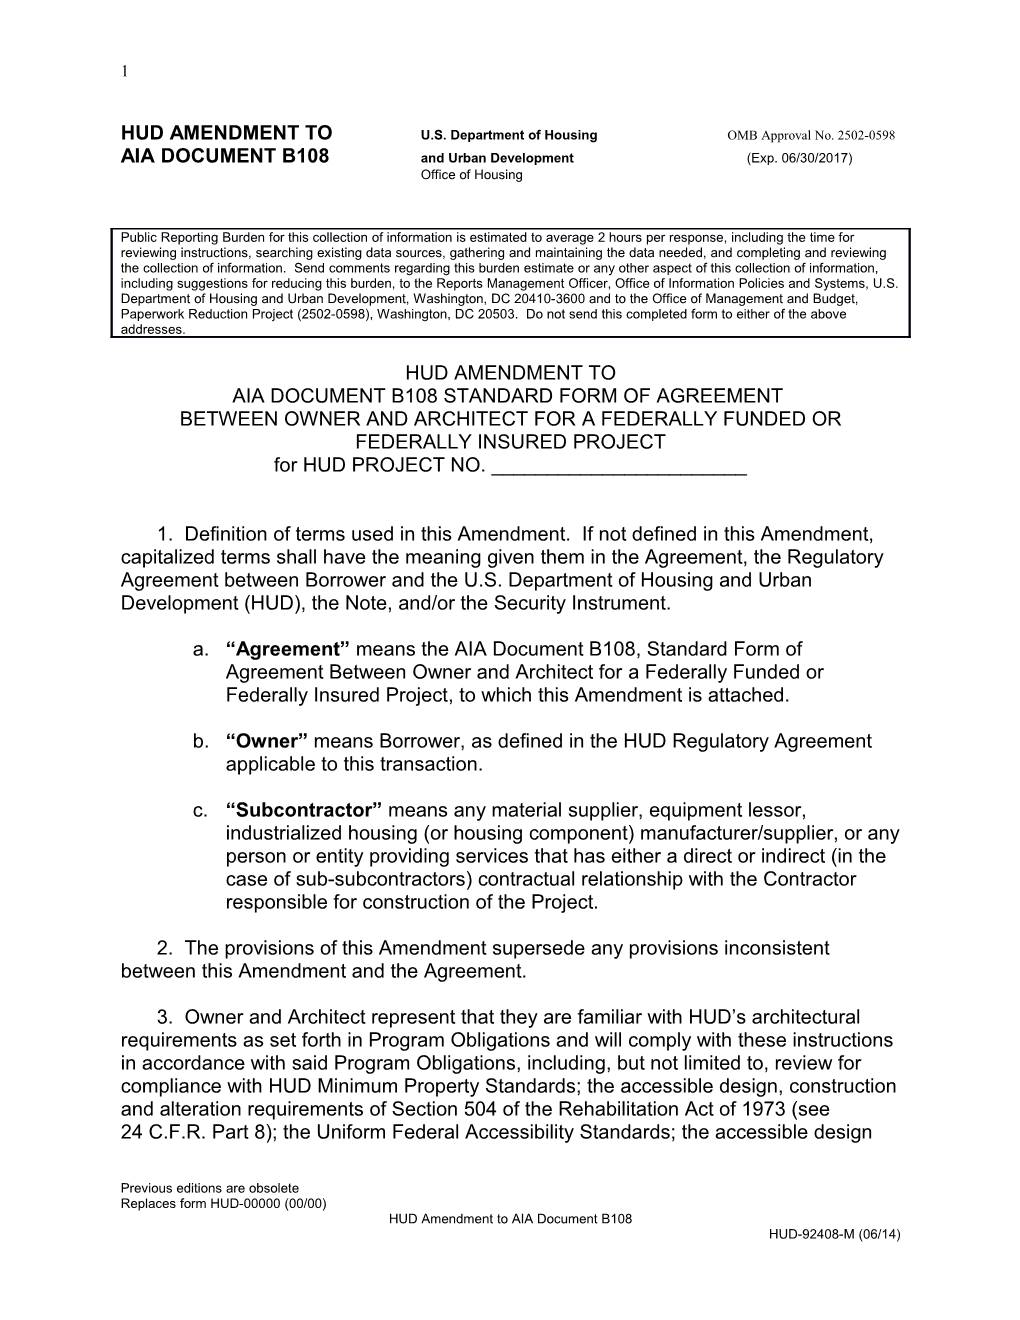 HUD AMENDMENT to U.S. Department of Housing OMB Approval No. 2502-0598